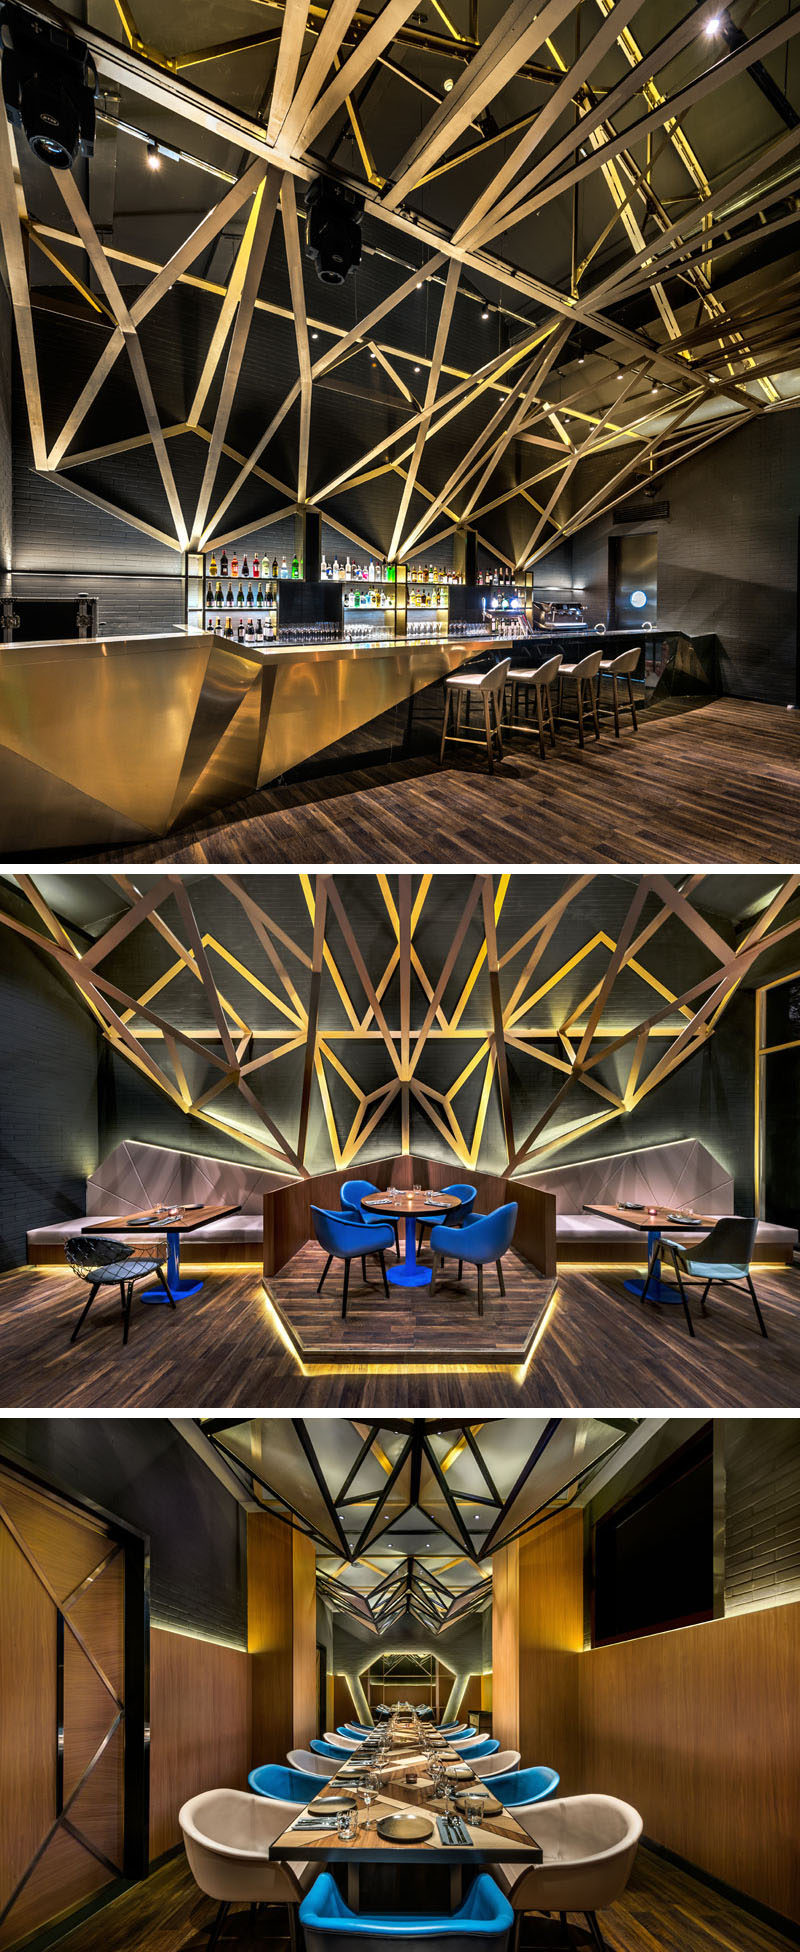 Inside this modern hotel restaurant, a dramatic high ceiling with exposed metal & wood trusses is lit up with hidden lighting, creating a striking appearance for guests of the hotel. #RestaurantDesign #Bar #InteriorDesign